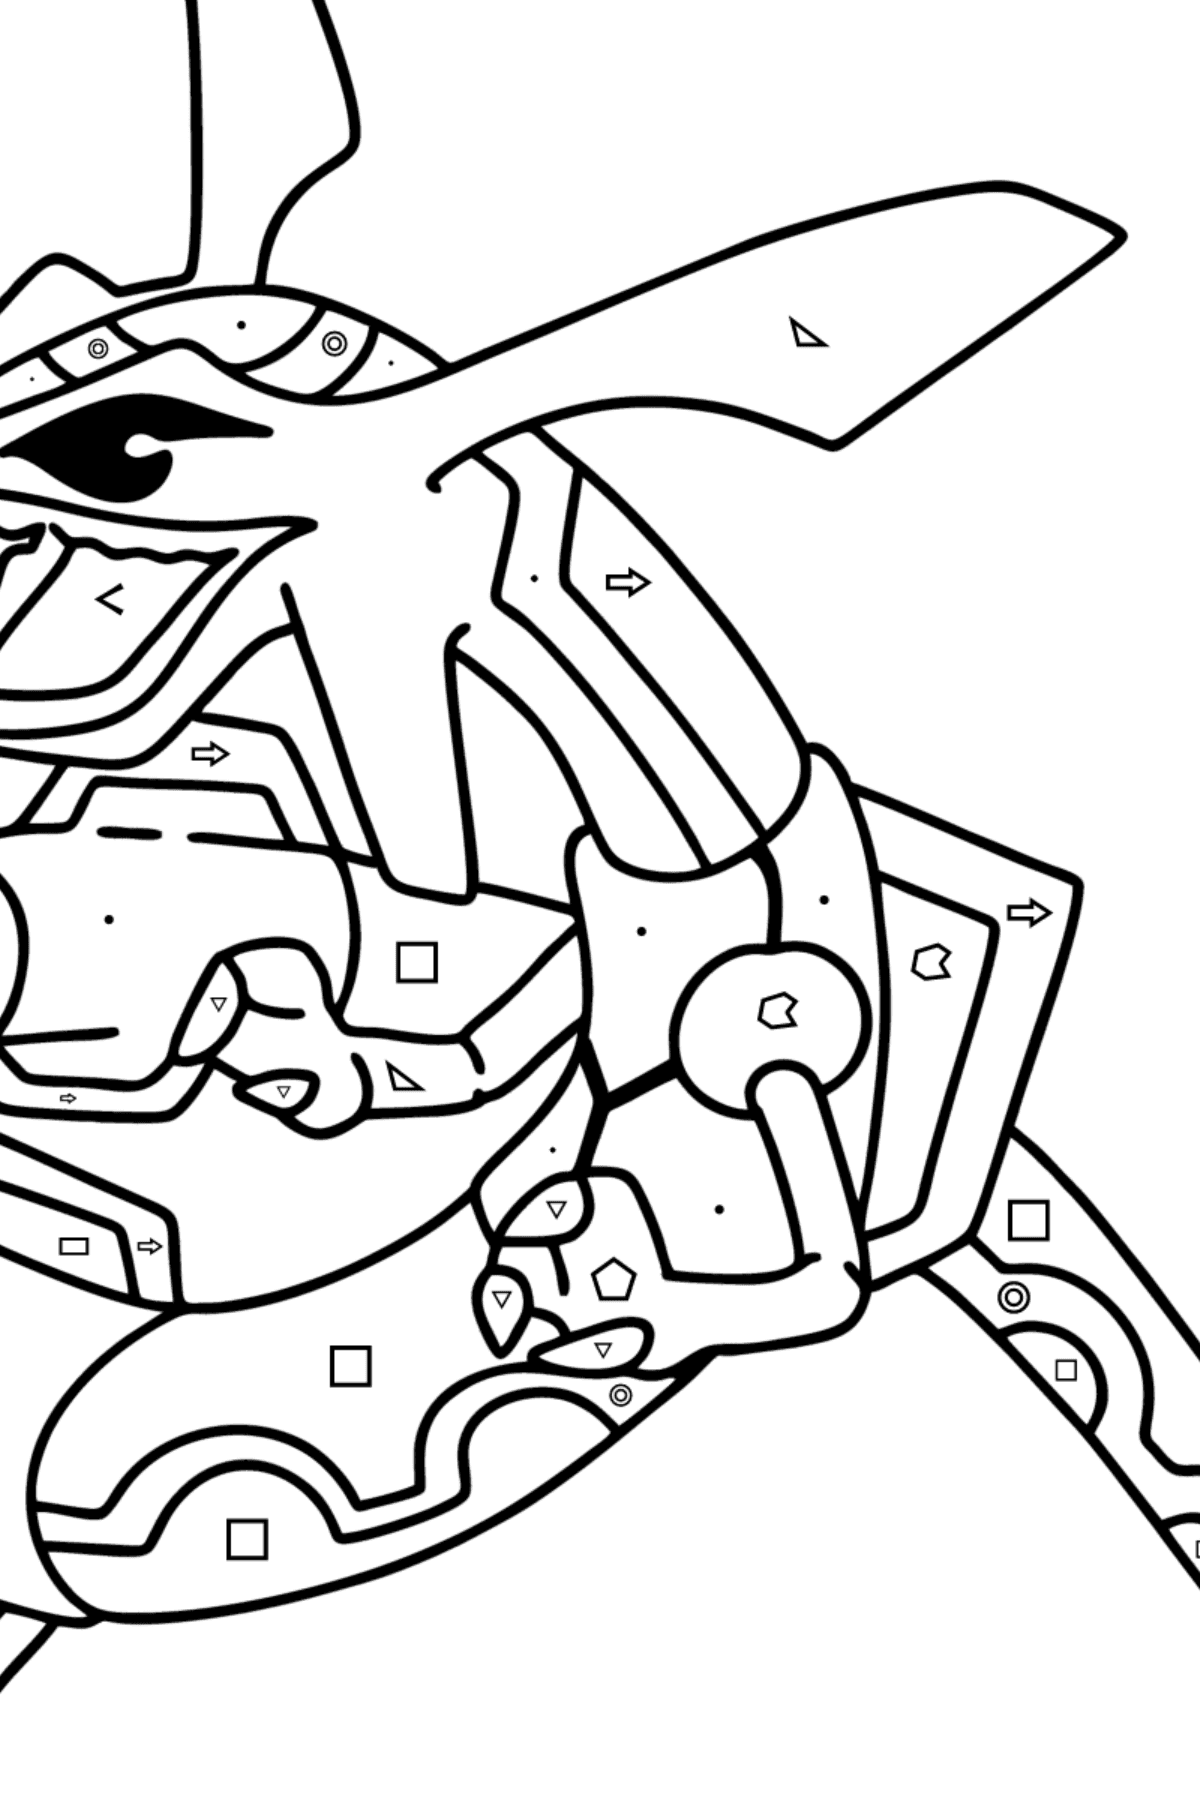 Coloring page Pokemon Go Rayquaza - Coloring by Symbols and Geometric Shapes for Kids